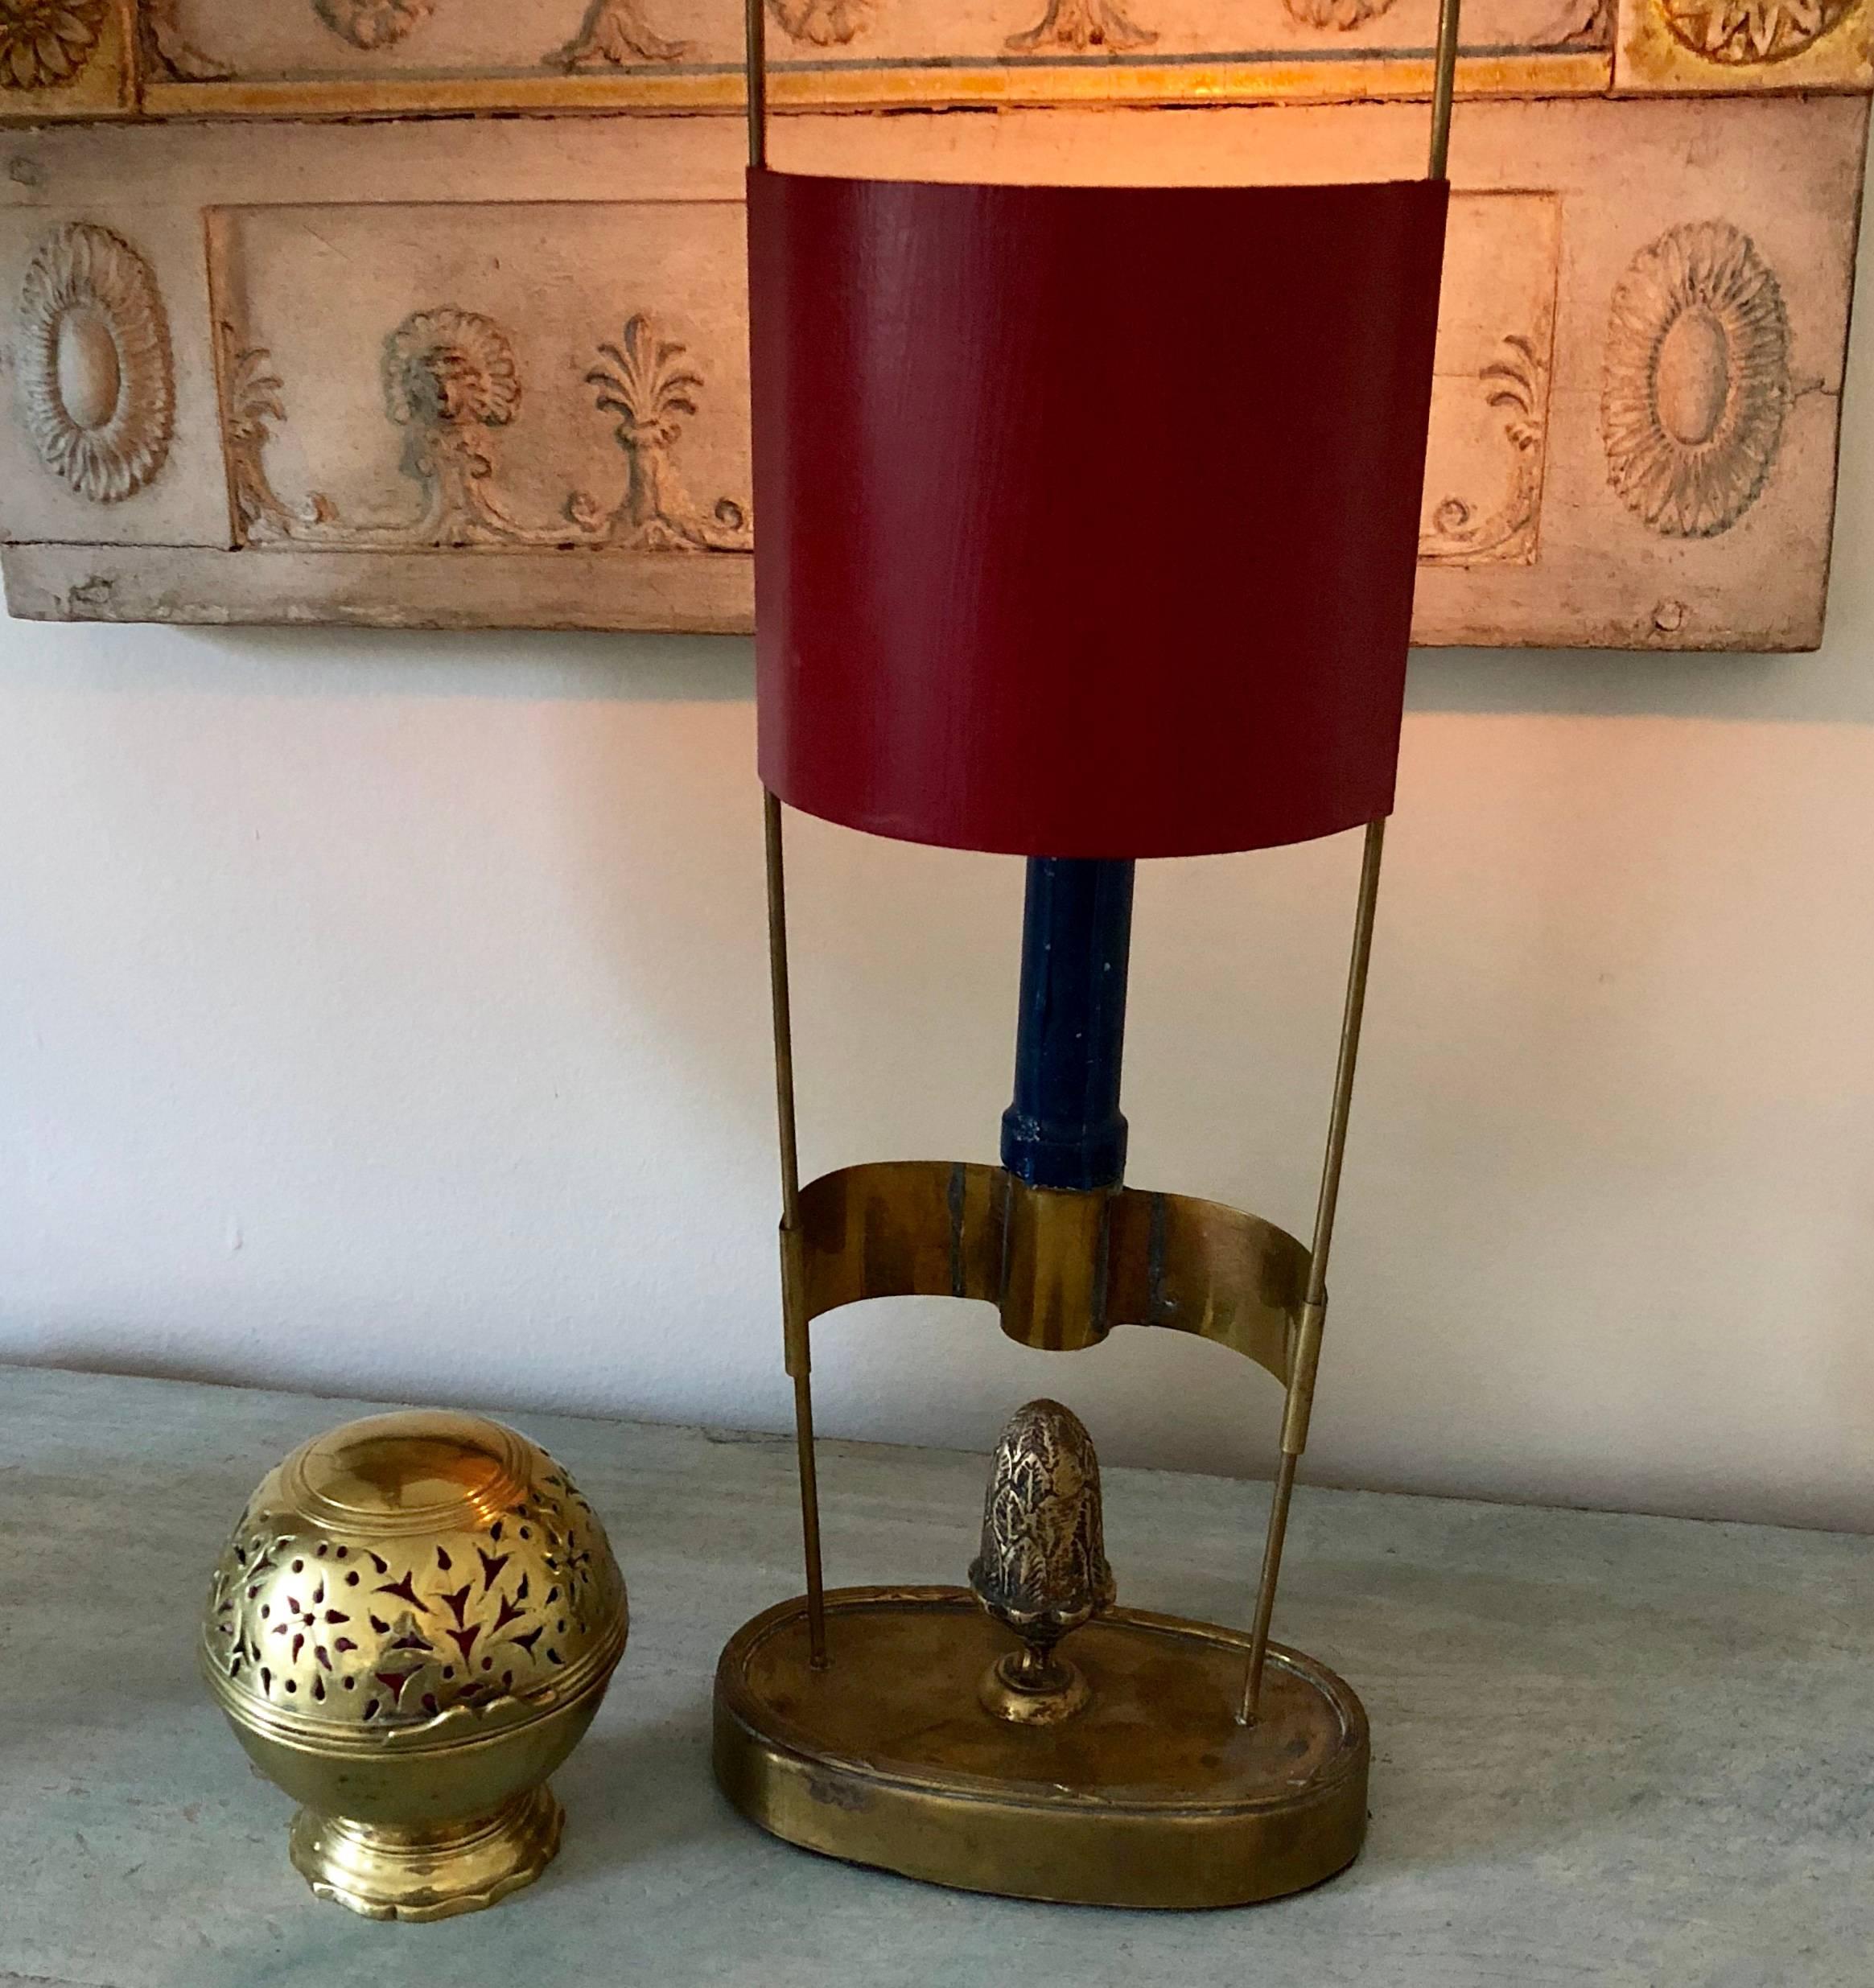 Small oval brass candlestick with a red painted shade and acorn centerpiece, Sweden early 19th Century.
